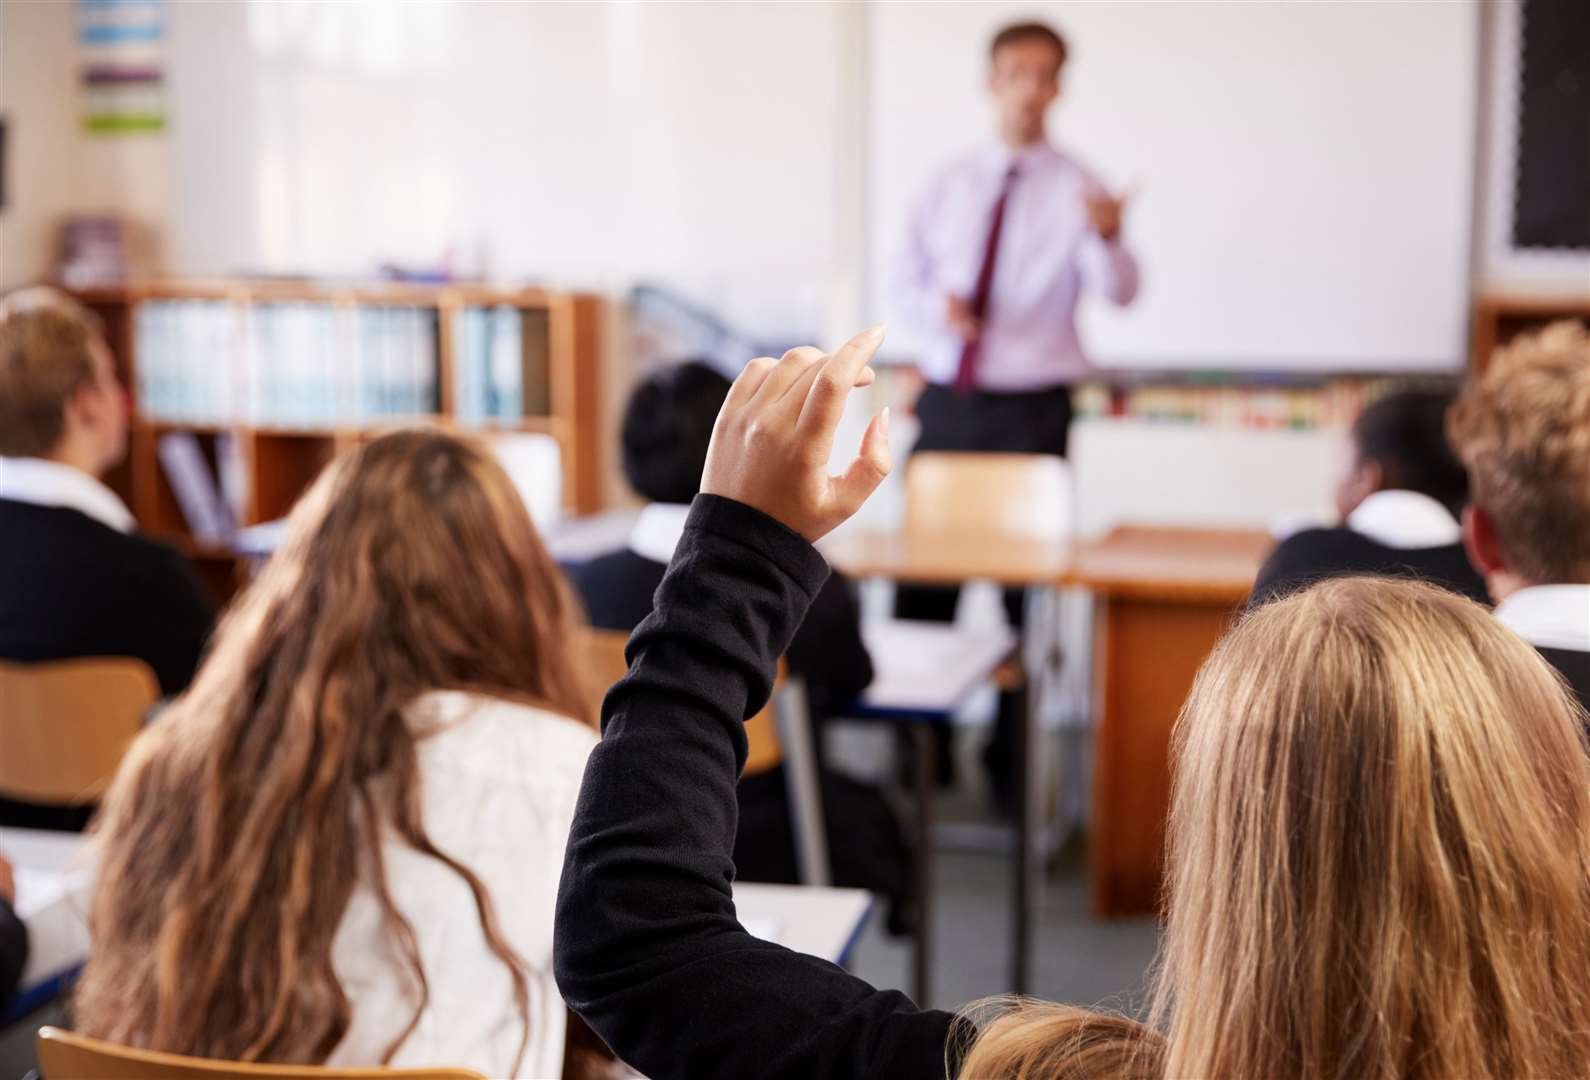 Inspectors found the quality of education ‘requires improvement’. Stock image